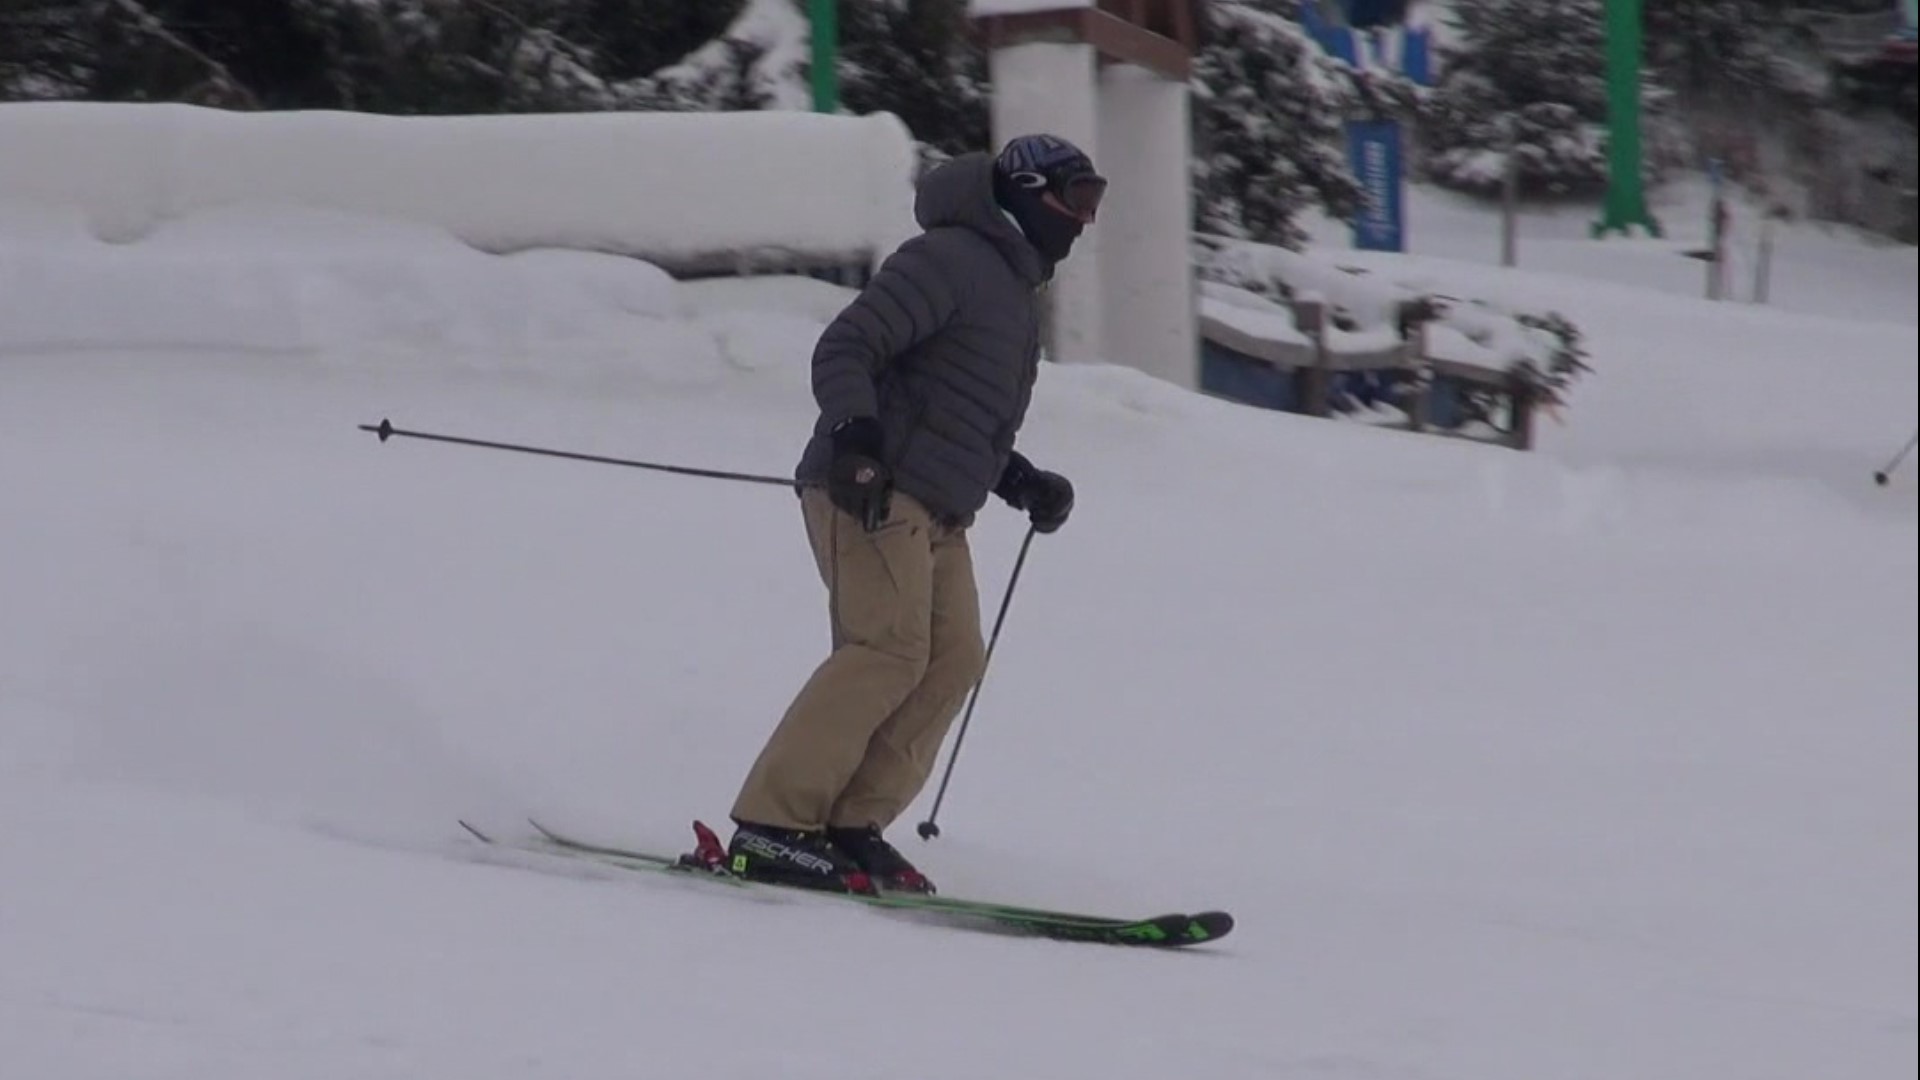 While there are some restrictions in place due to COVID-19, getting out in the fresh air and hitting the slopes was a taste of normalcy for many skiers today.